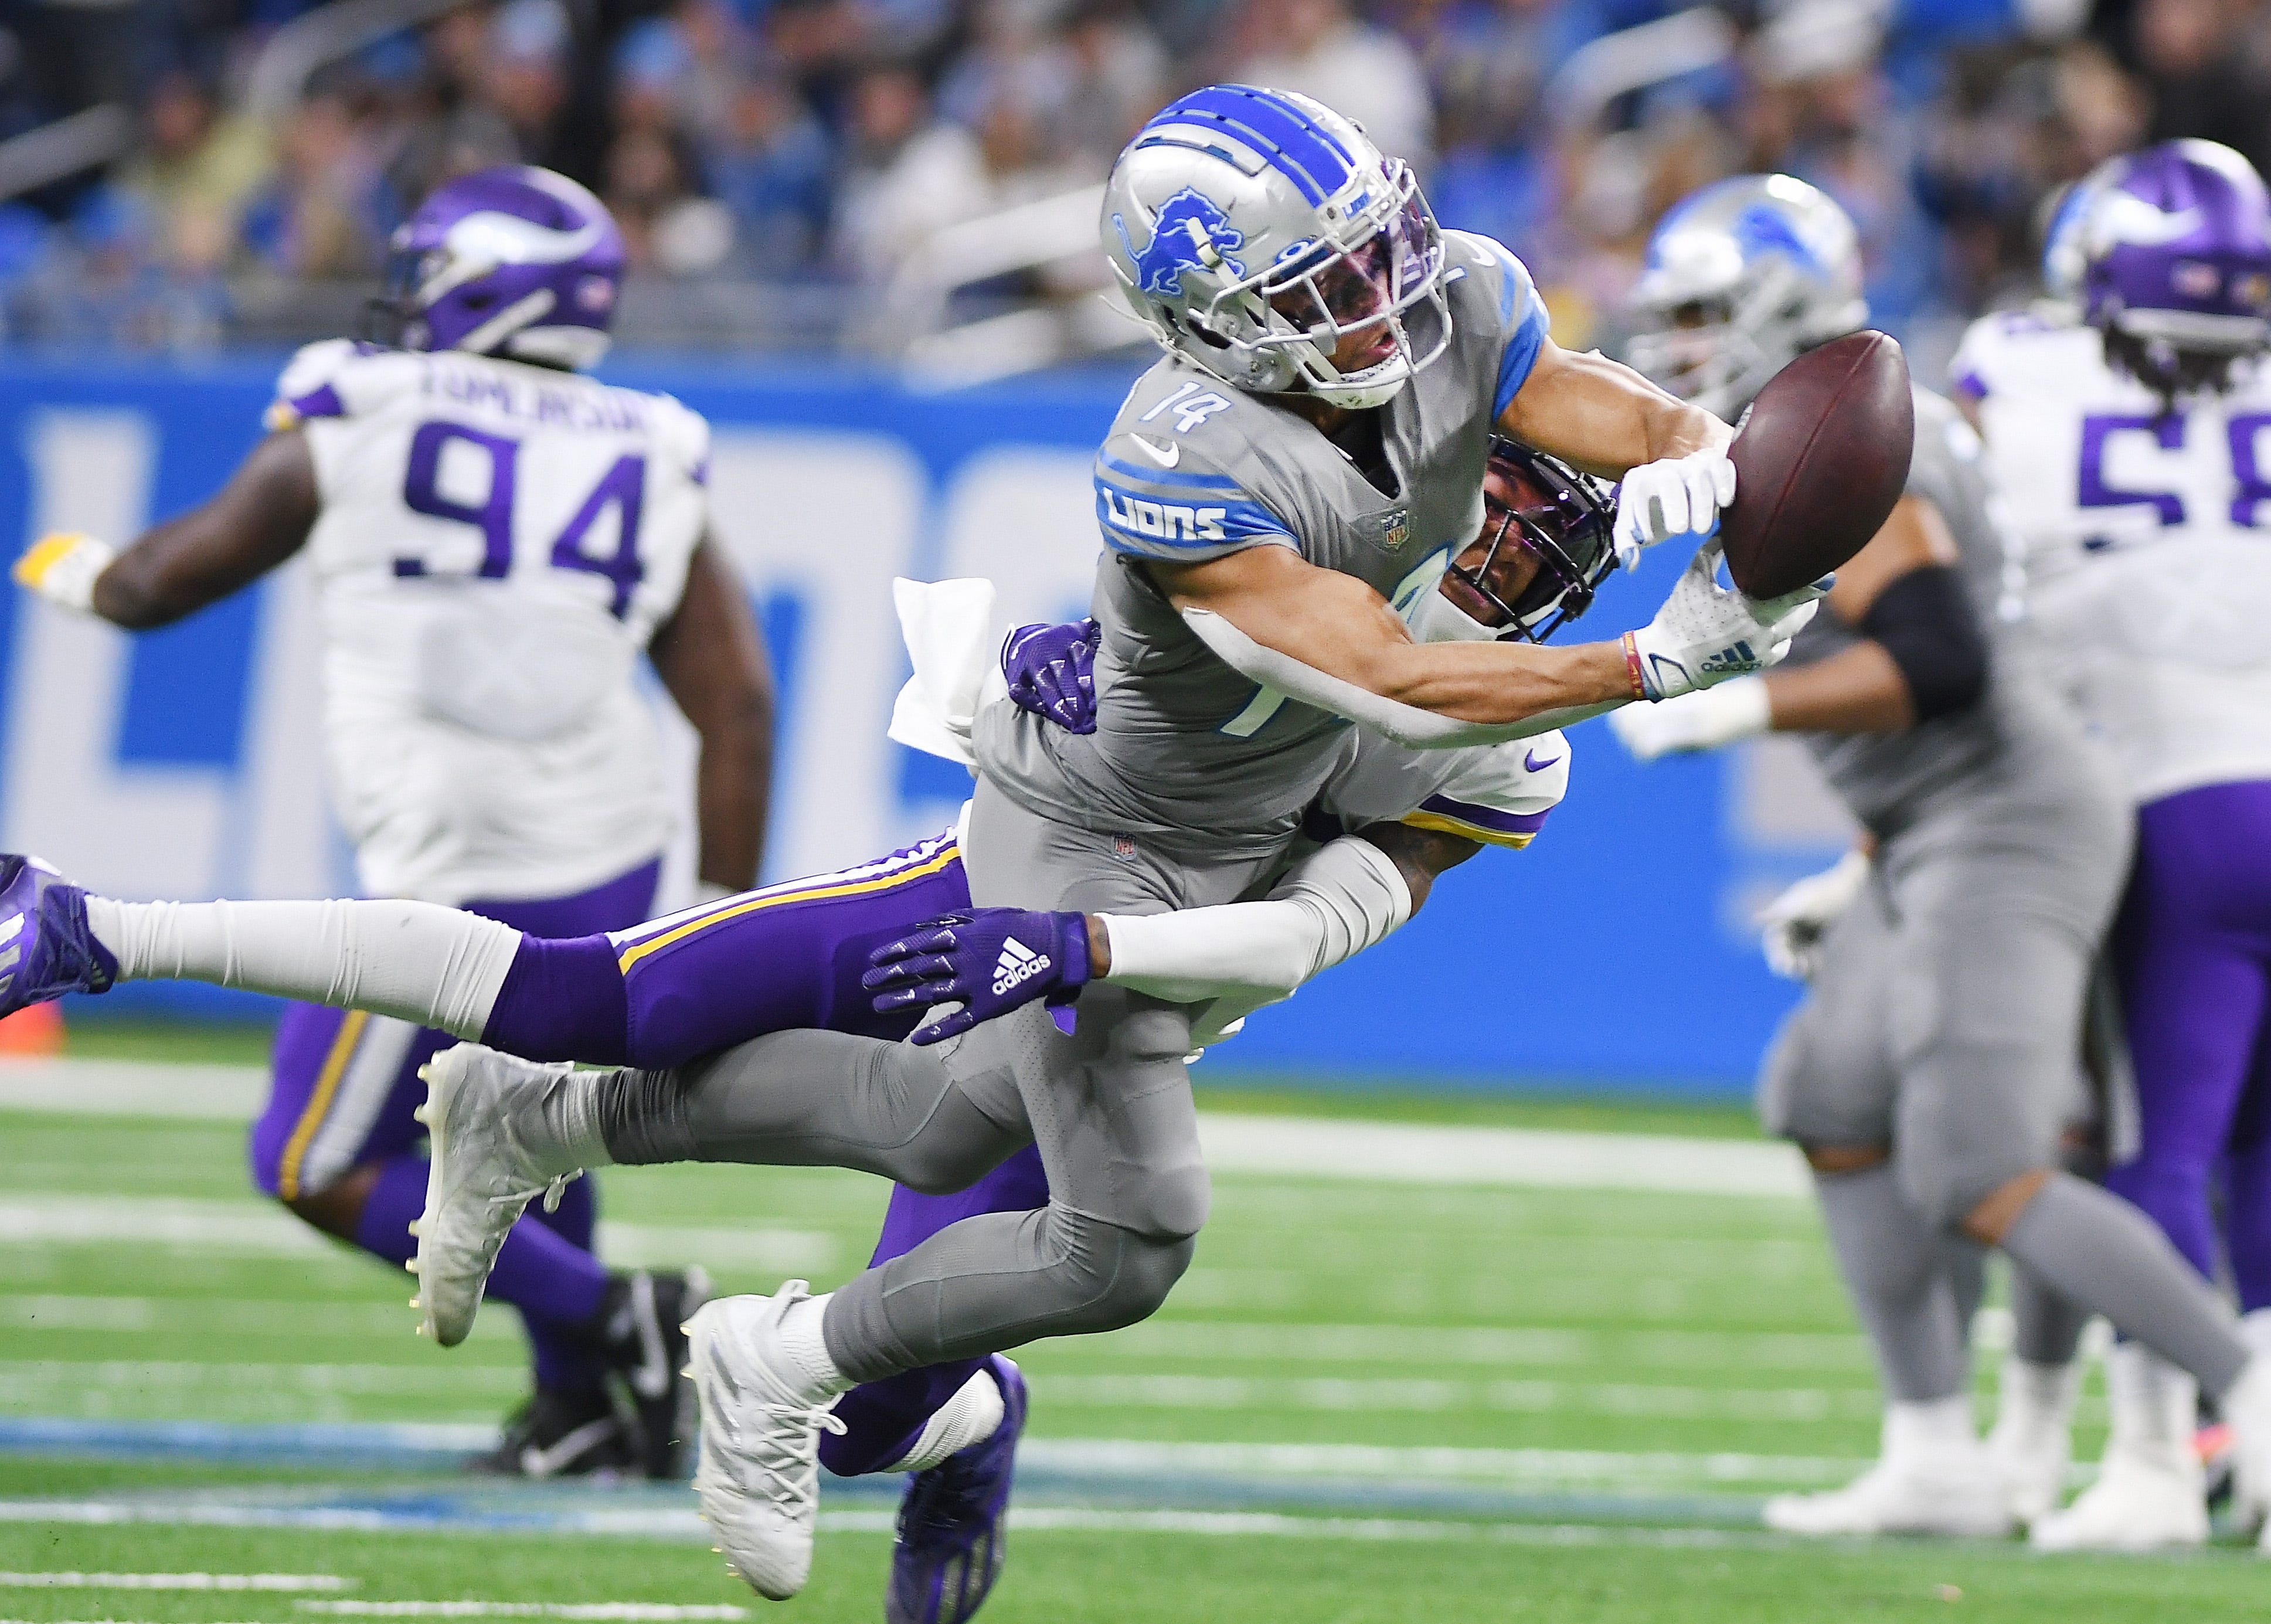 Lions wide receiver Amon-Ra St. Brown can't pull in a reception with Vikings' Cameron Dantzler defending in the fourth quarter.